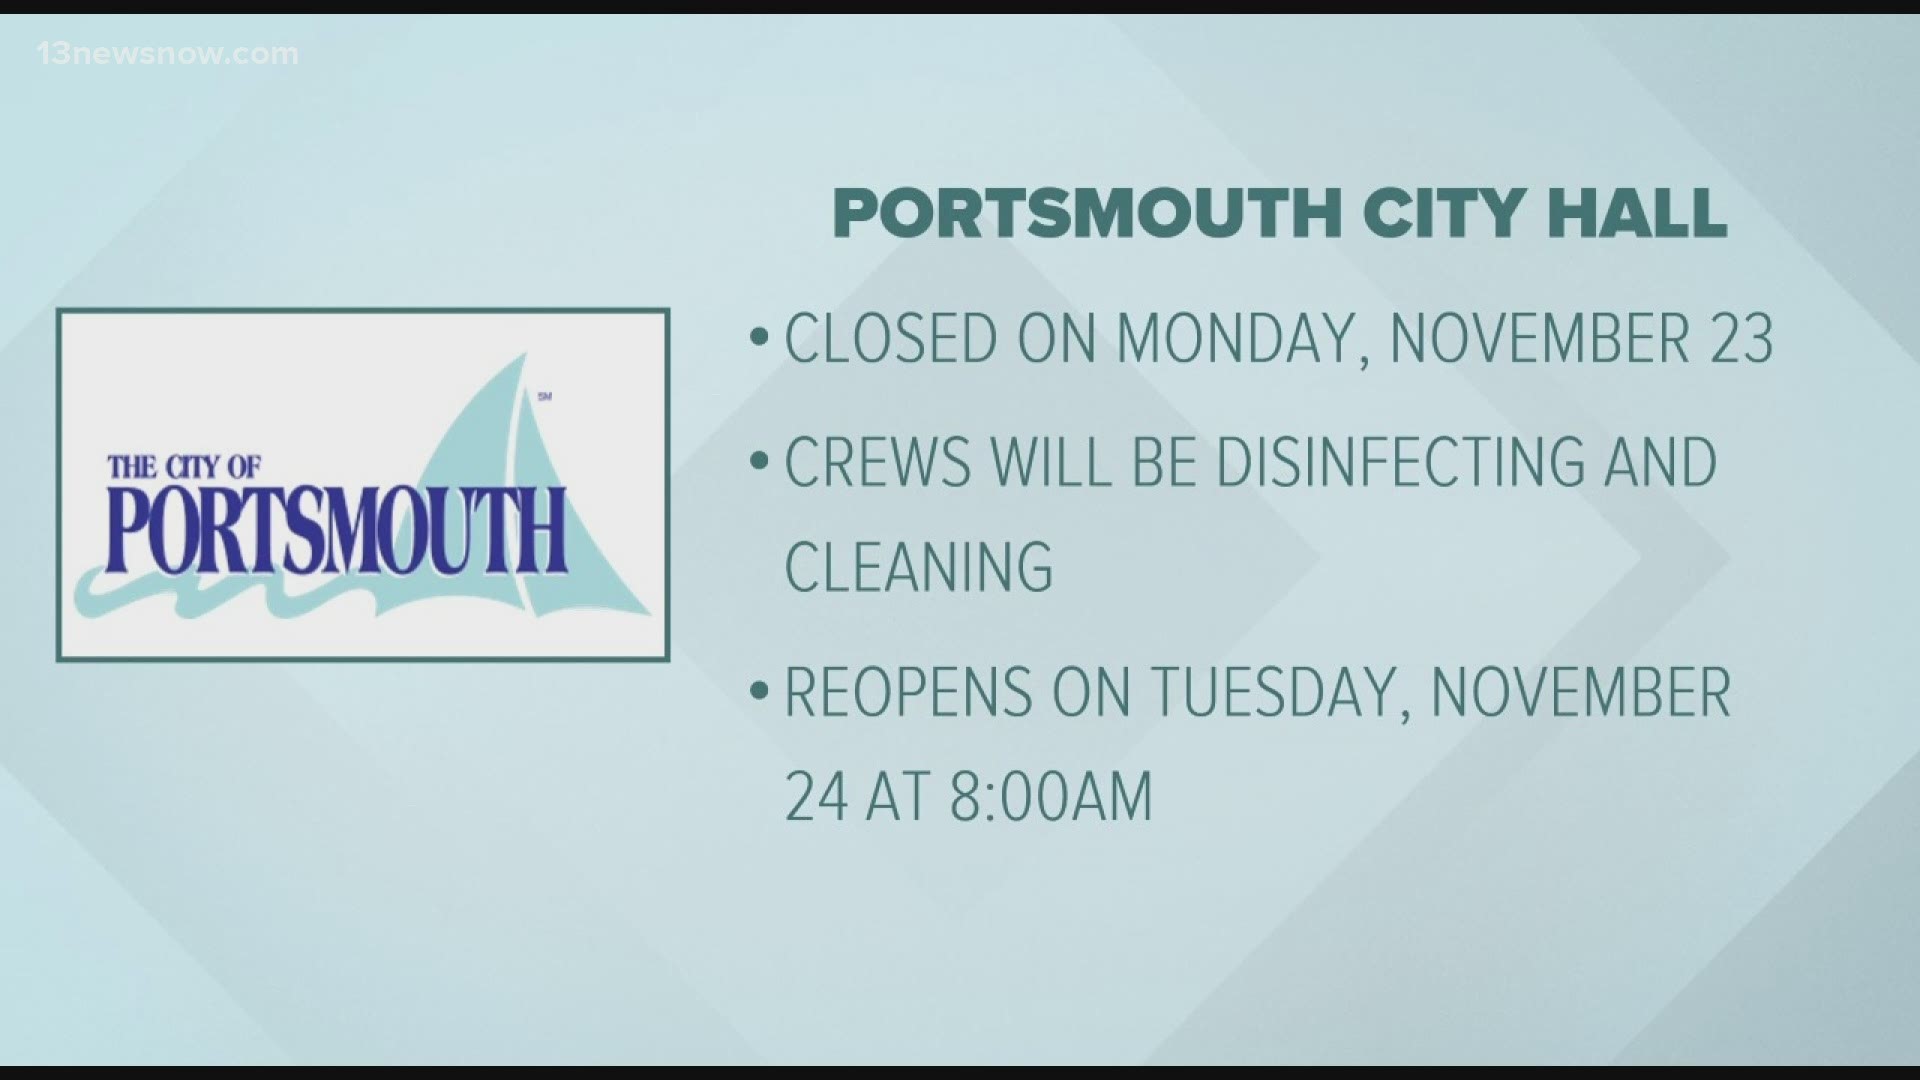 Portsmouth City Hall will be closed Monday, Nov. 23 for enhanced cleaning due to COVID-19.